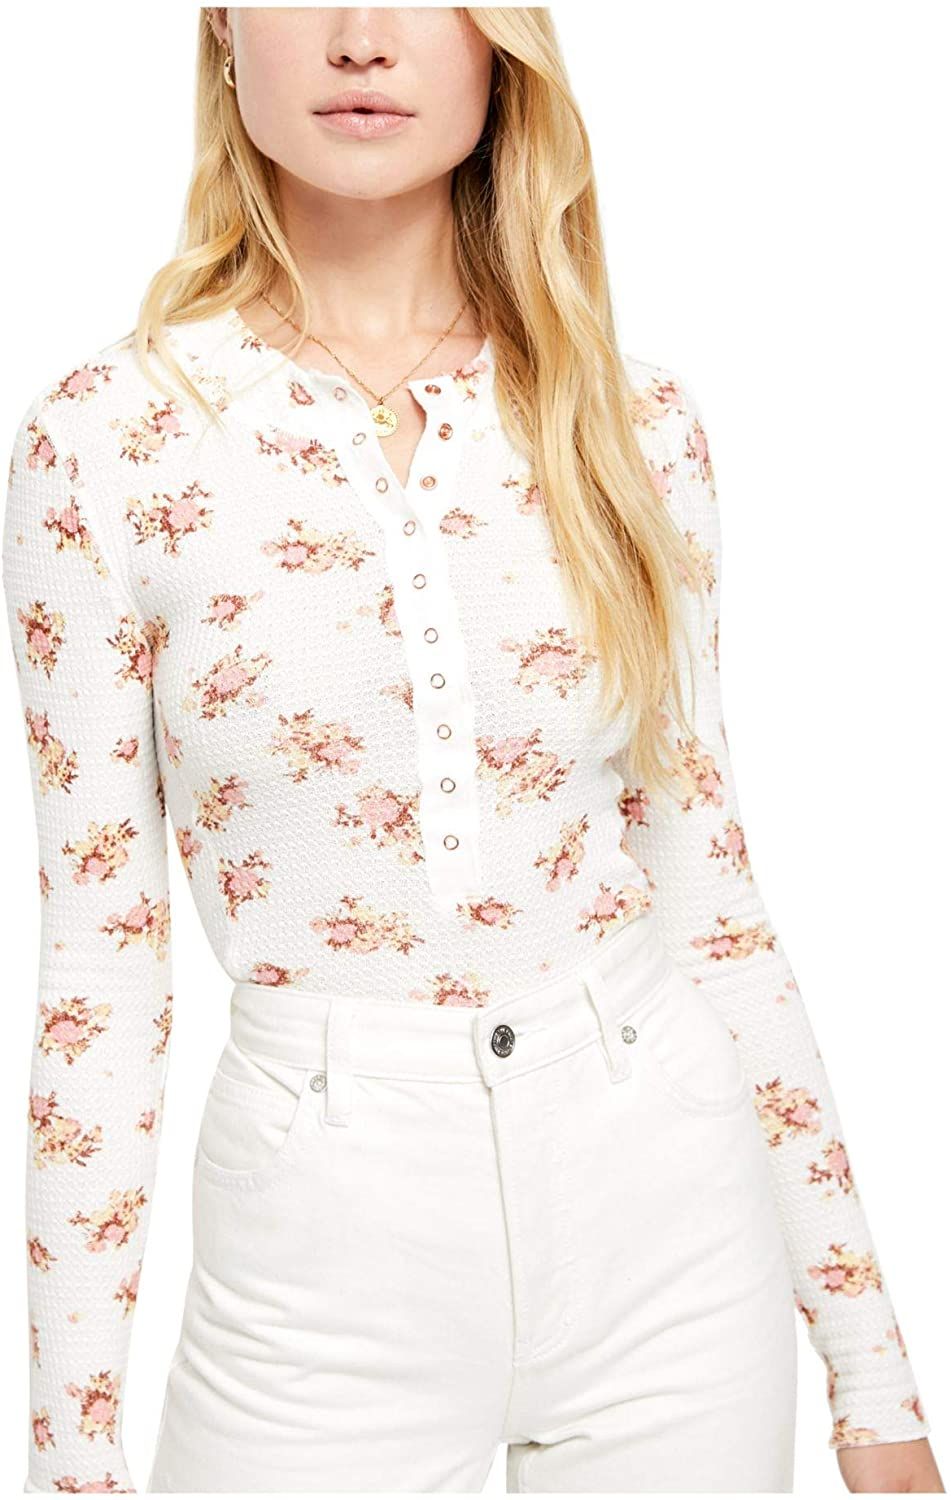 Color: Whites Size Type: Regular Size (Women's): M Sleeve Length: Long Sleeve Type: T-Shirt Style: Knit Top Neckline: Round Neck Pattern: Floral Theme: Colorful Material: Rayon